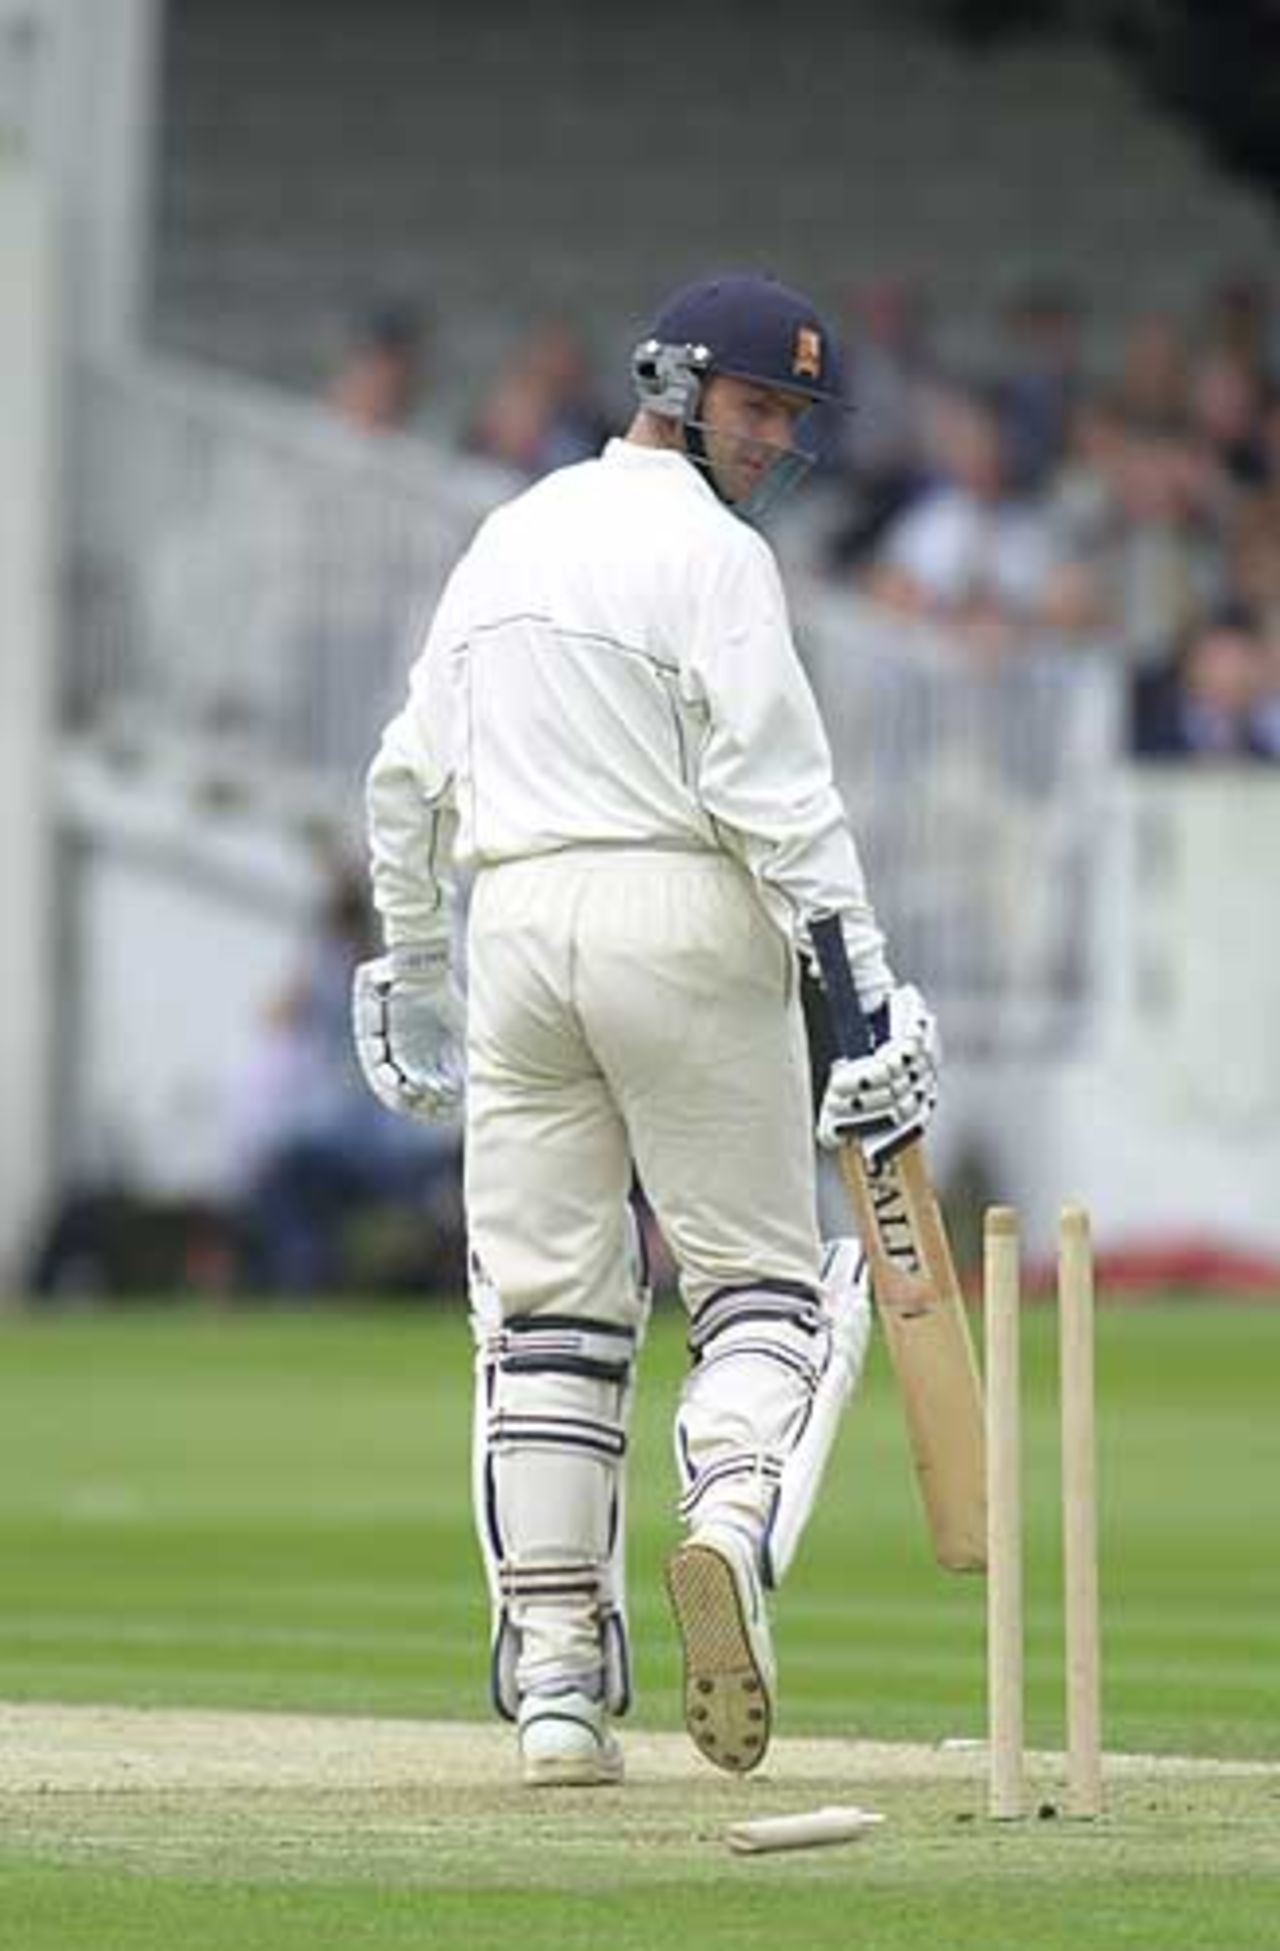 John Stephenson after the briefest of stays at the wicket, out first ball to Neil Carter, Essex v Warwickshire, B and H Cup Final, Lord's, 22 June 2002